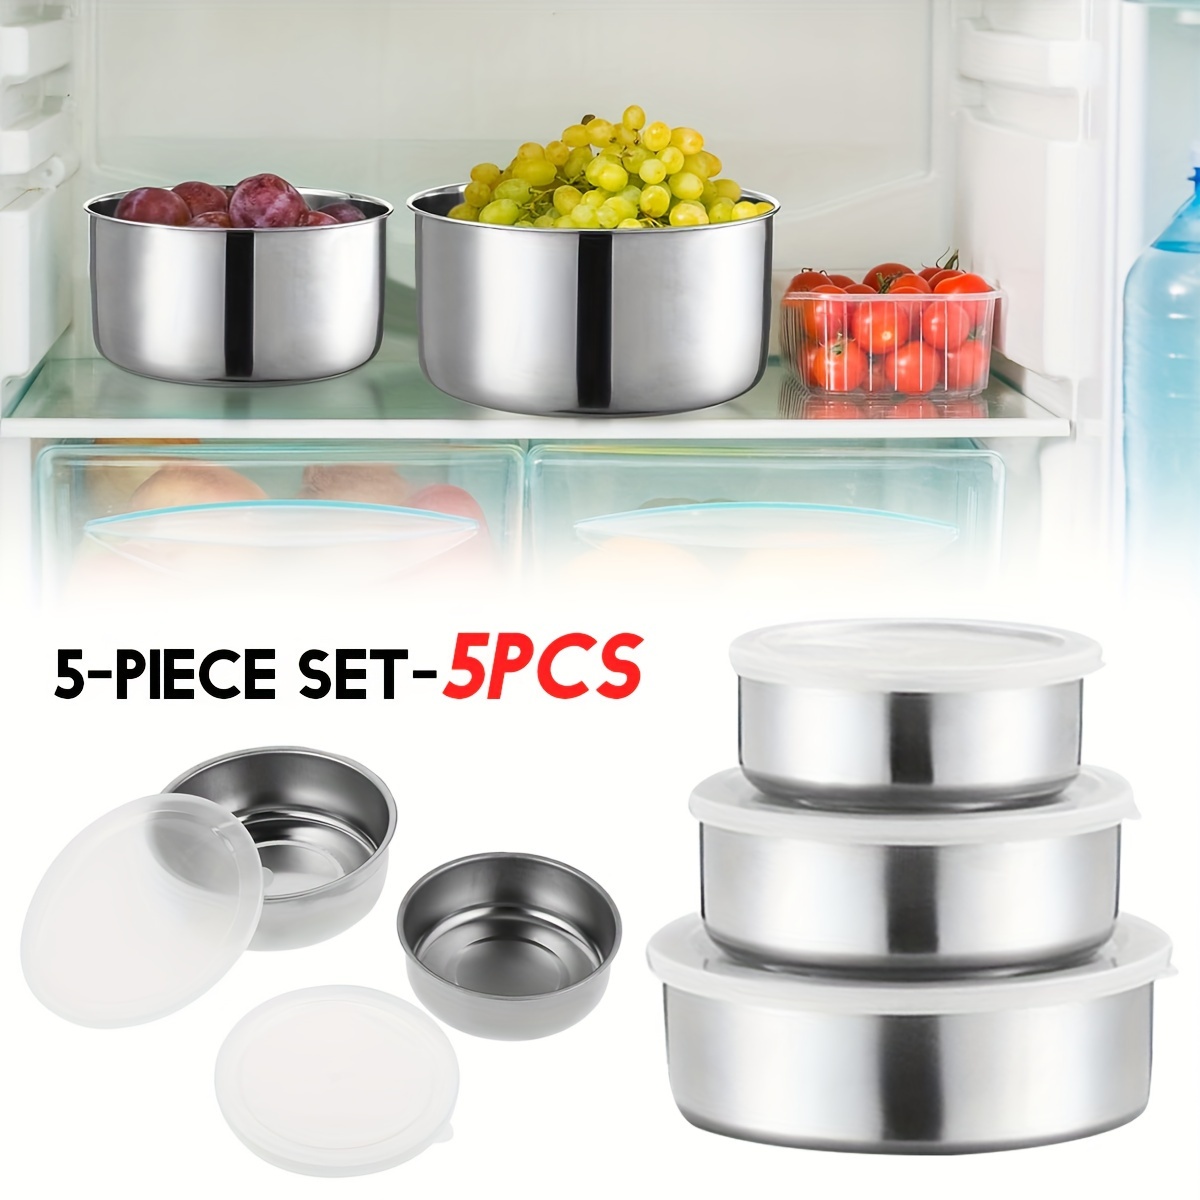 

easy-clean" 5-piece Stainless Steel Food Storage Set - Leakproof, Airtight Lids For Meal Prep & Lunch Boxes